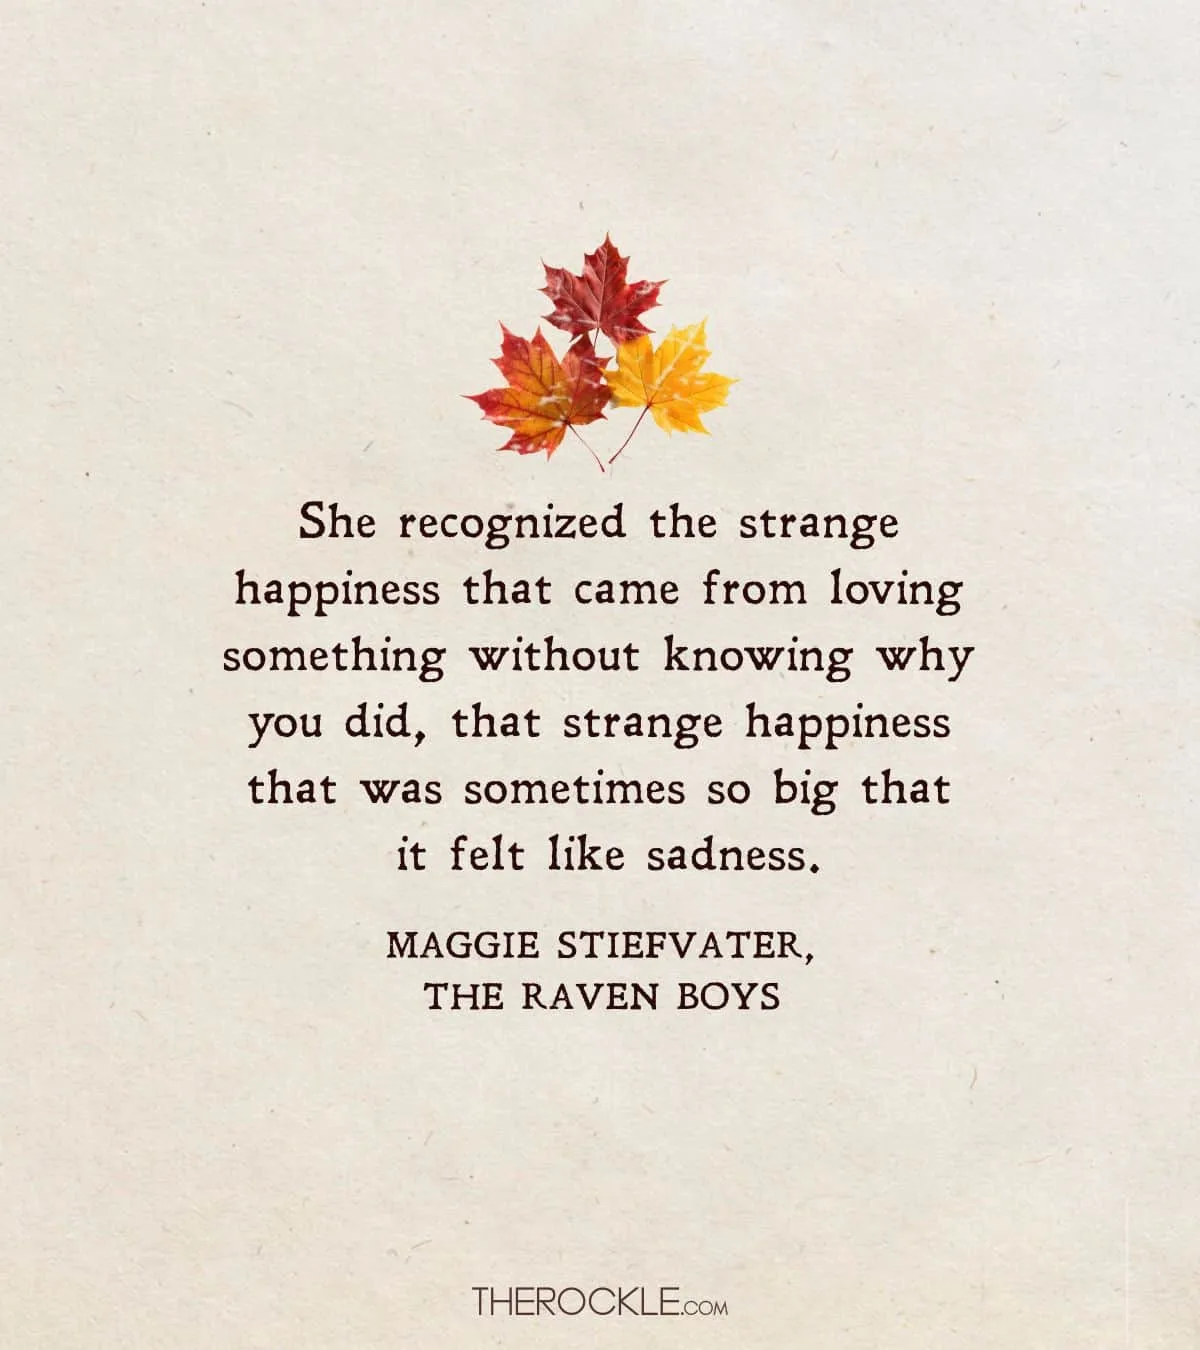 Quote from The Raven Boys by Maggie Stiefvater